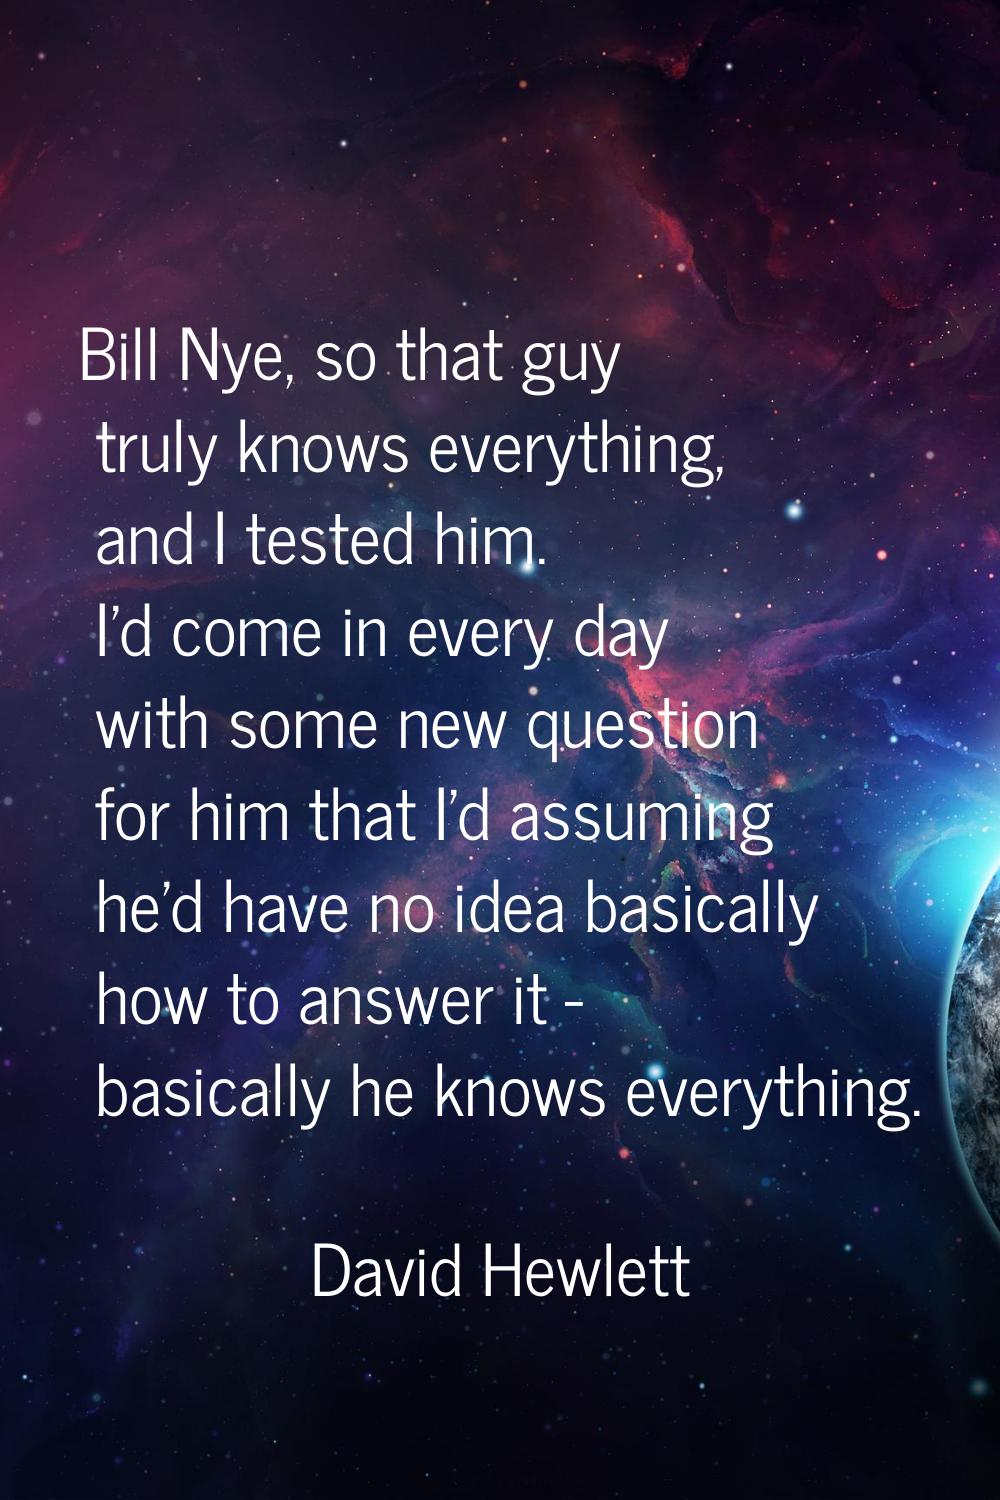 Bill Nye, so that guy truly knows everything, and I tested him. I'd come in every day with some new